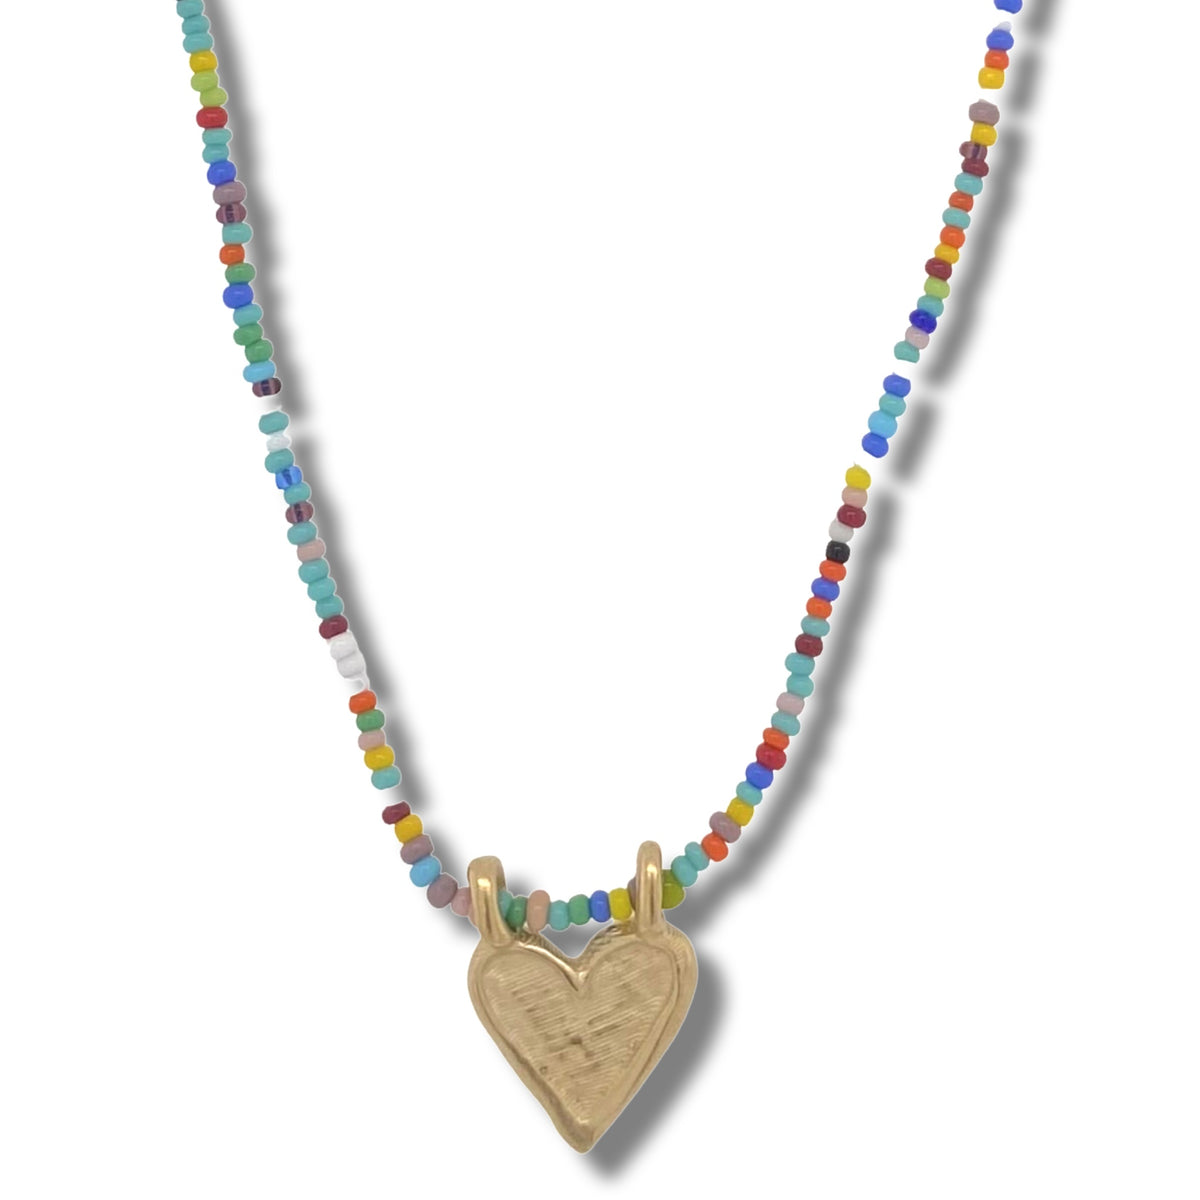 MINI HEART CHARM NECKLACE IN GOLD ON MULTI COLOR BEADS